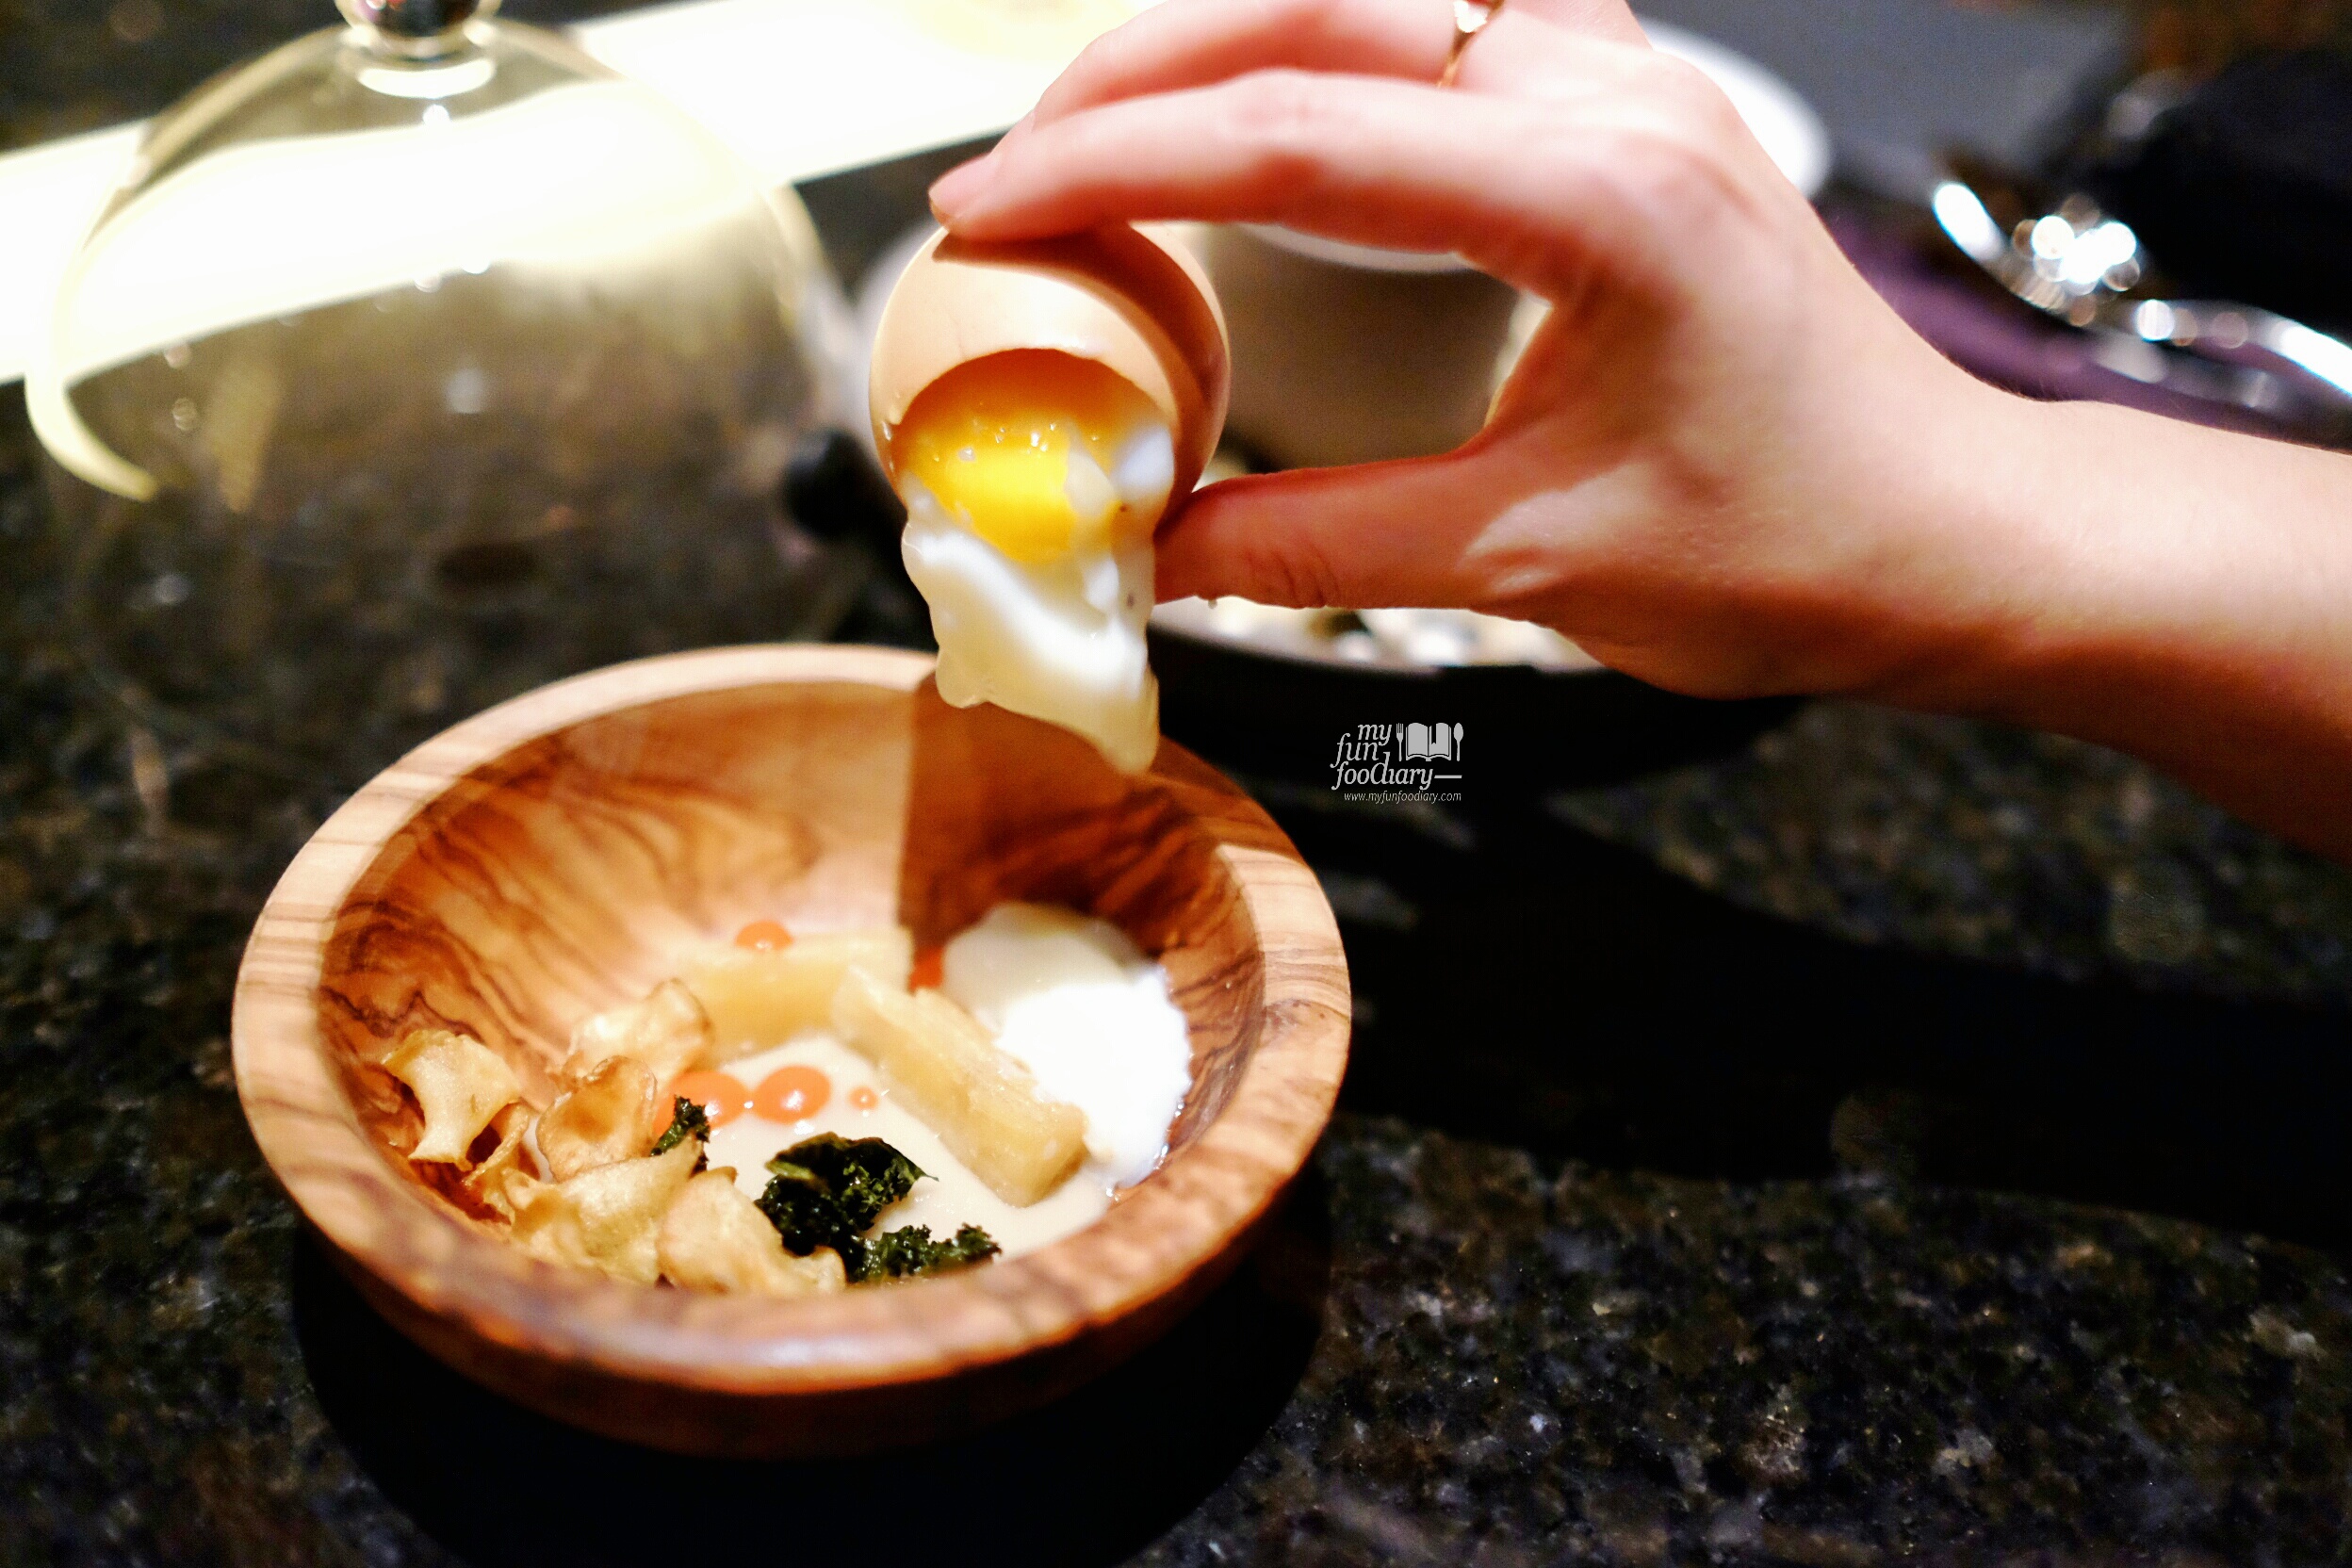 K22 Egg at The View Gastro Bar by Myfunfoodiary